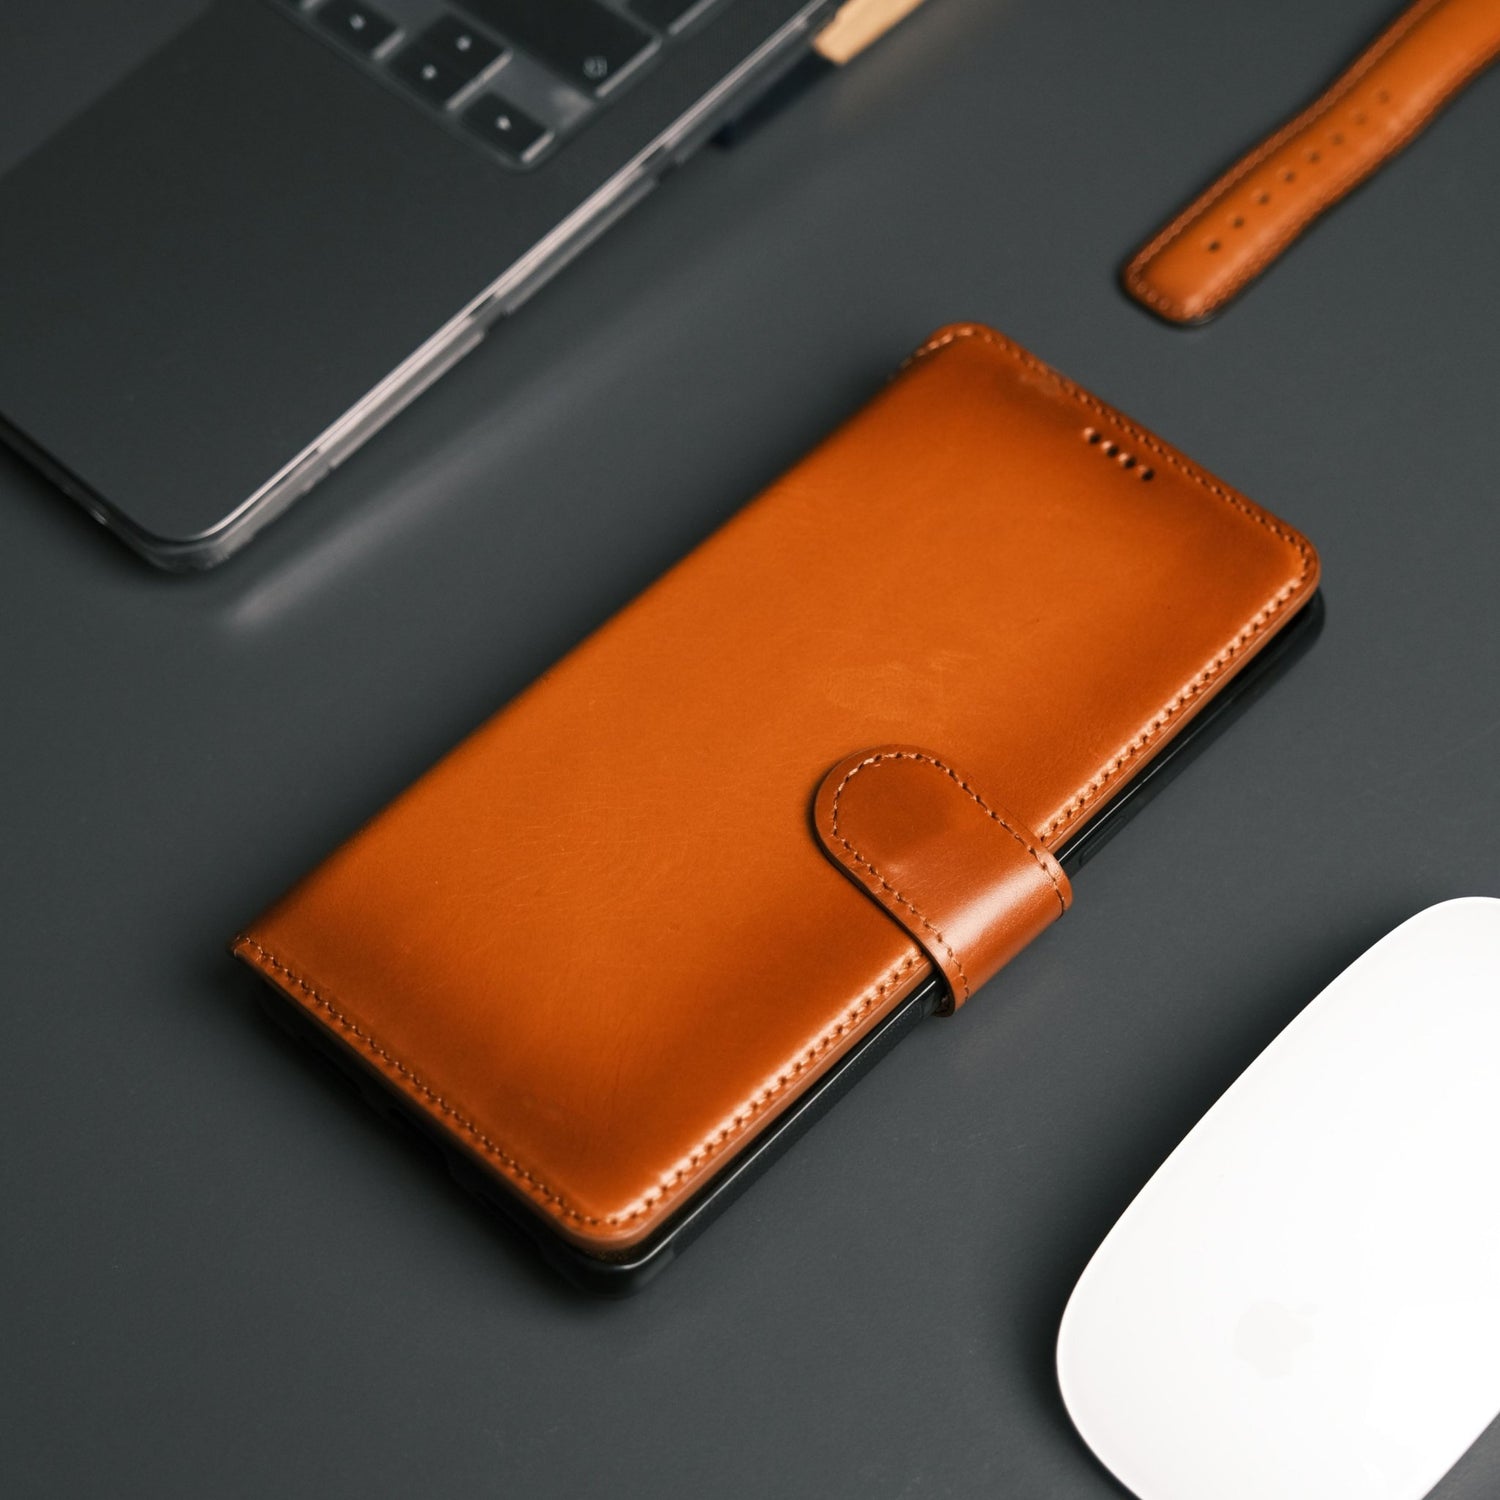 Samsung Galaxy S23 Ultra Leather Wallet Case is Perfect for Decluttering - TORONATA